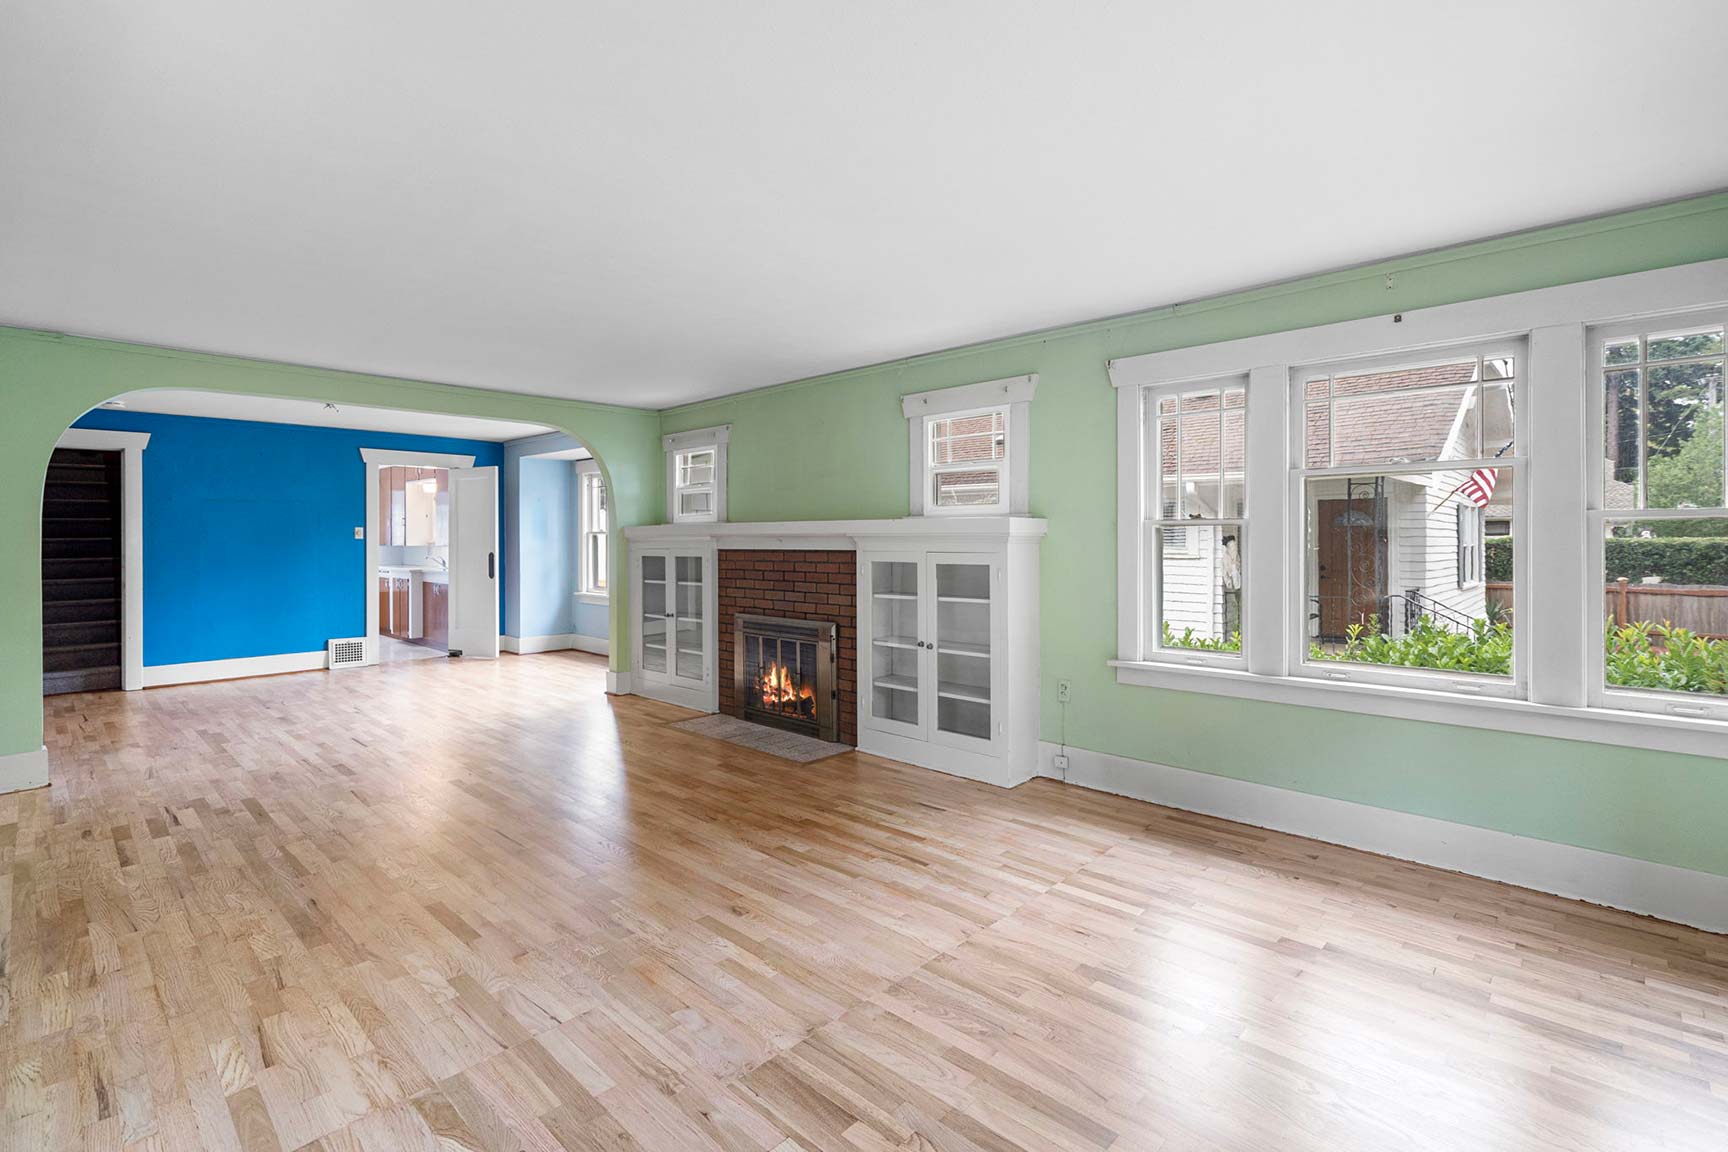 Spacious living room with refinished hardwood floors